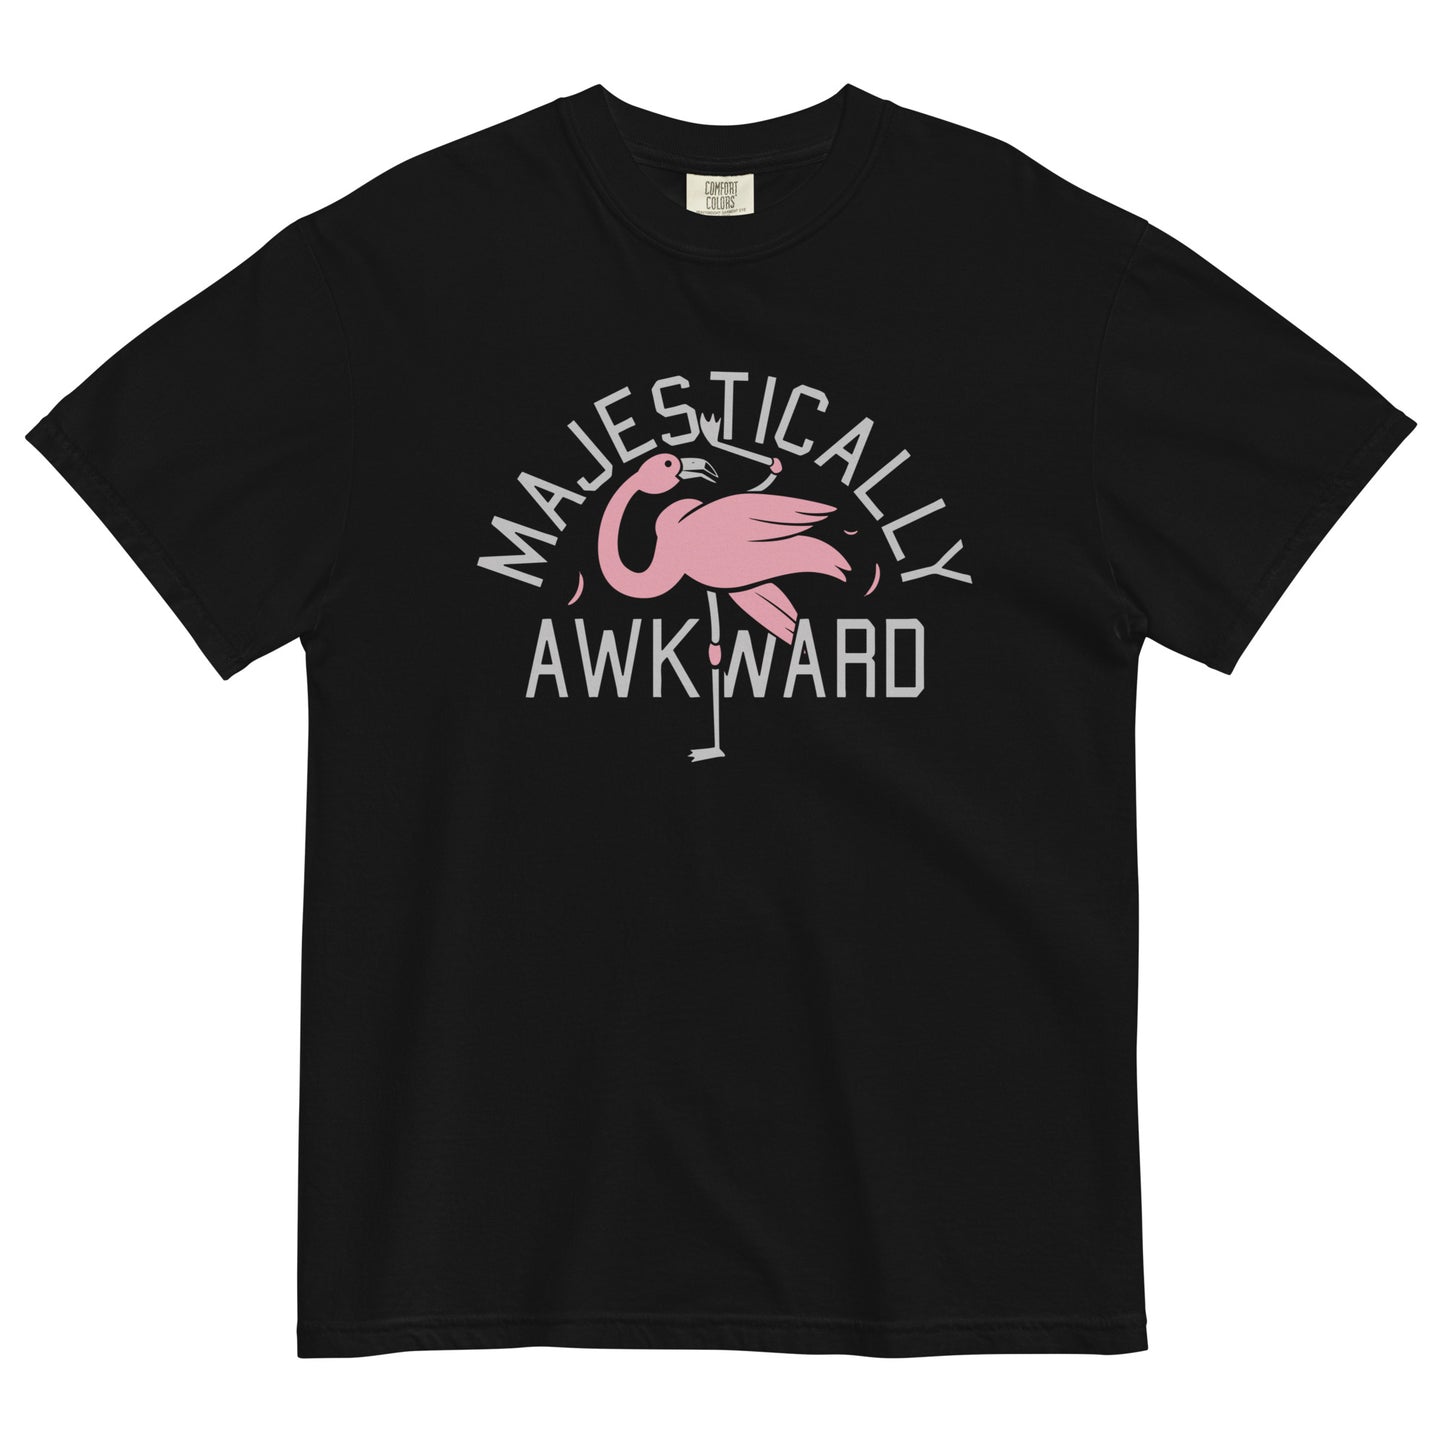 Majestically Awkward Men's Relaxed Fit Tee